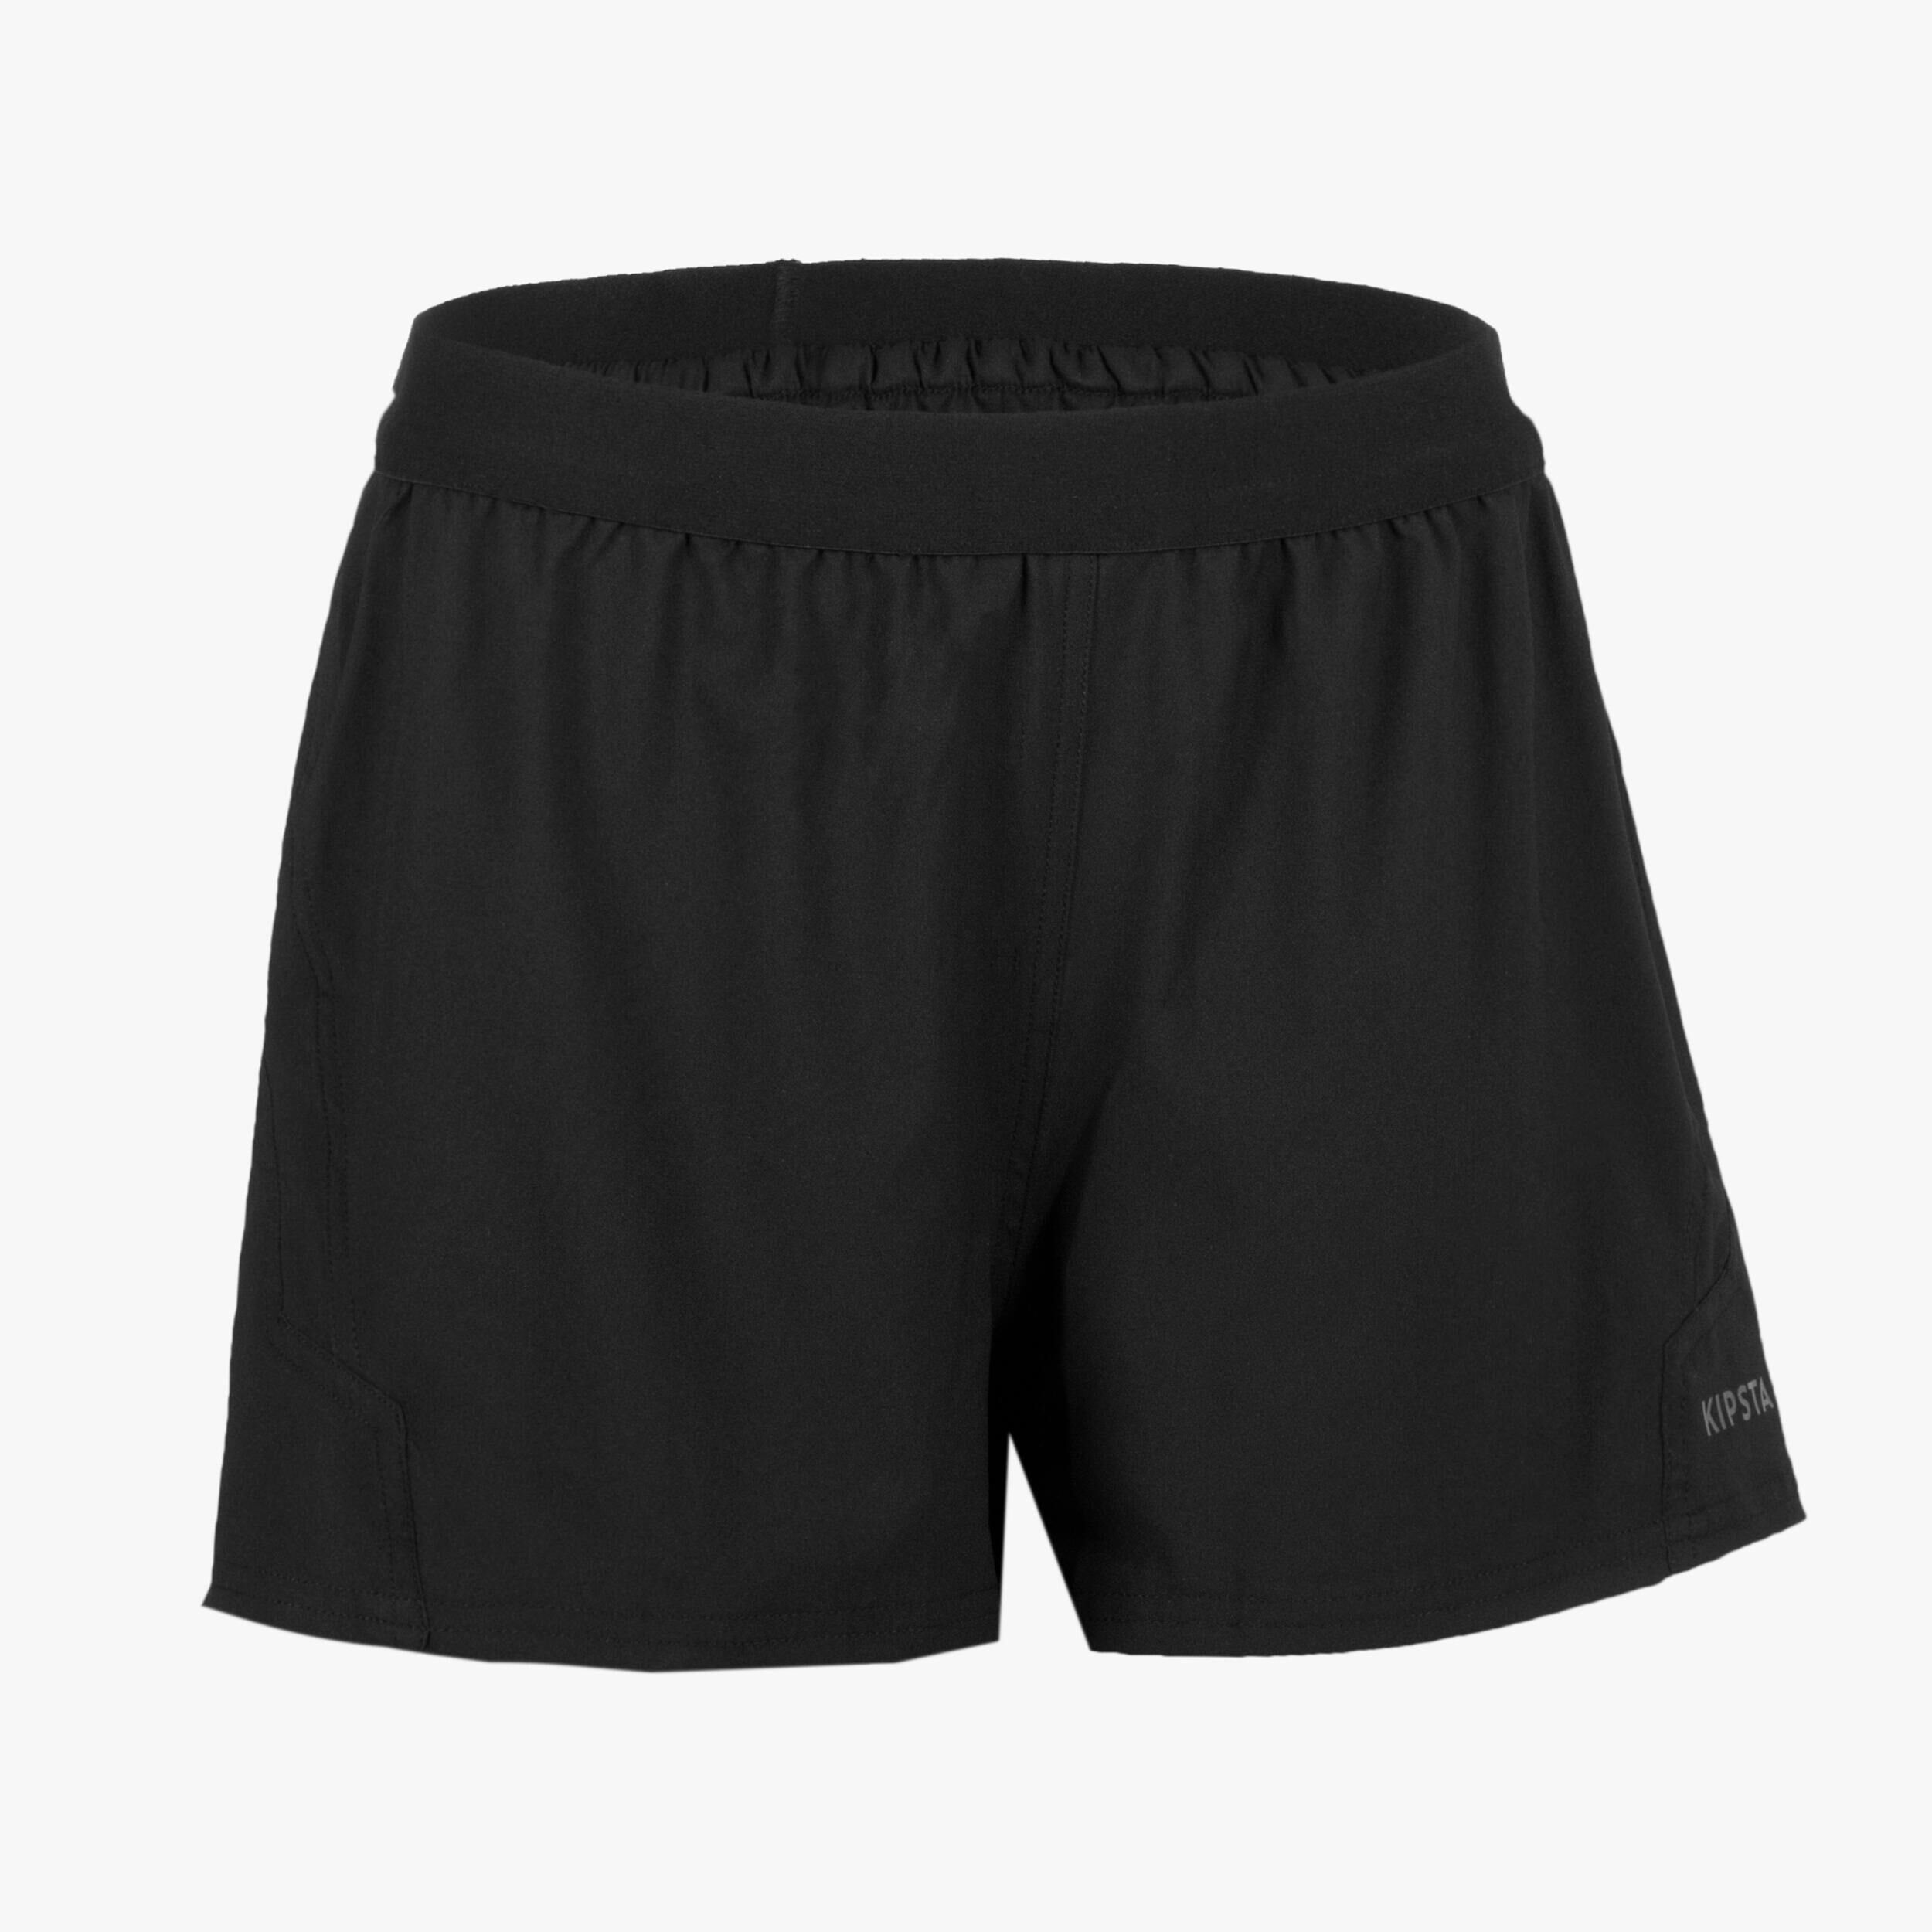 OFFLOAD Women's Rugby Shorts R500 - Black